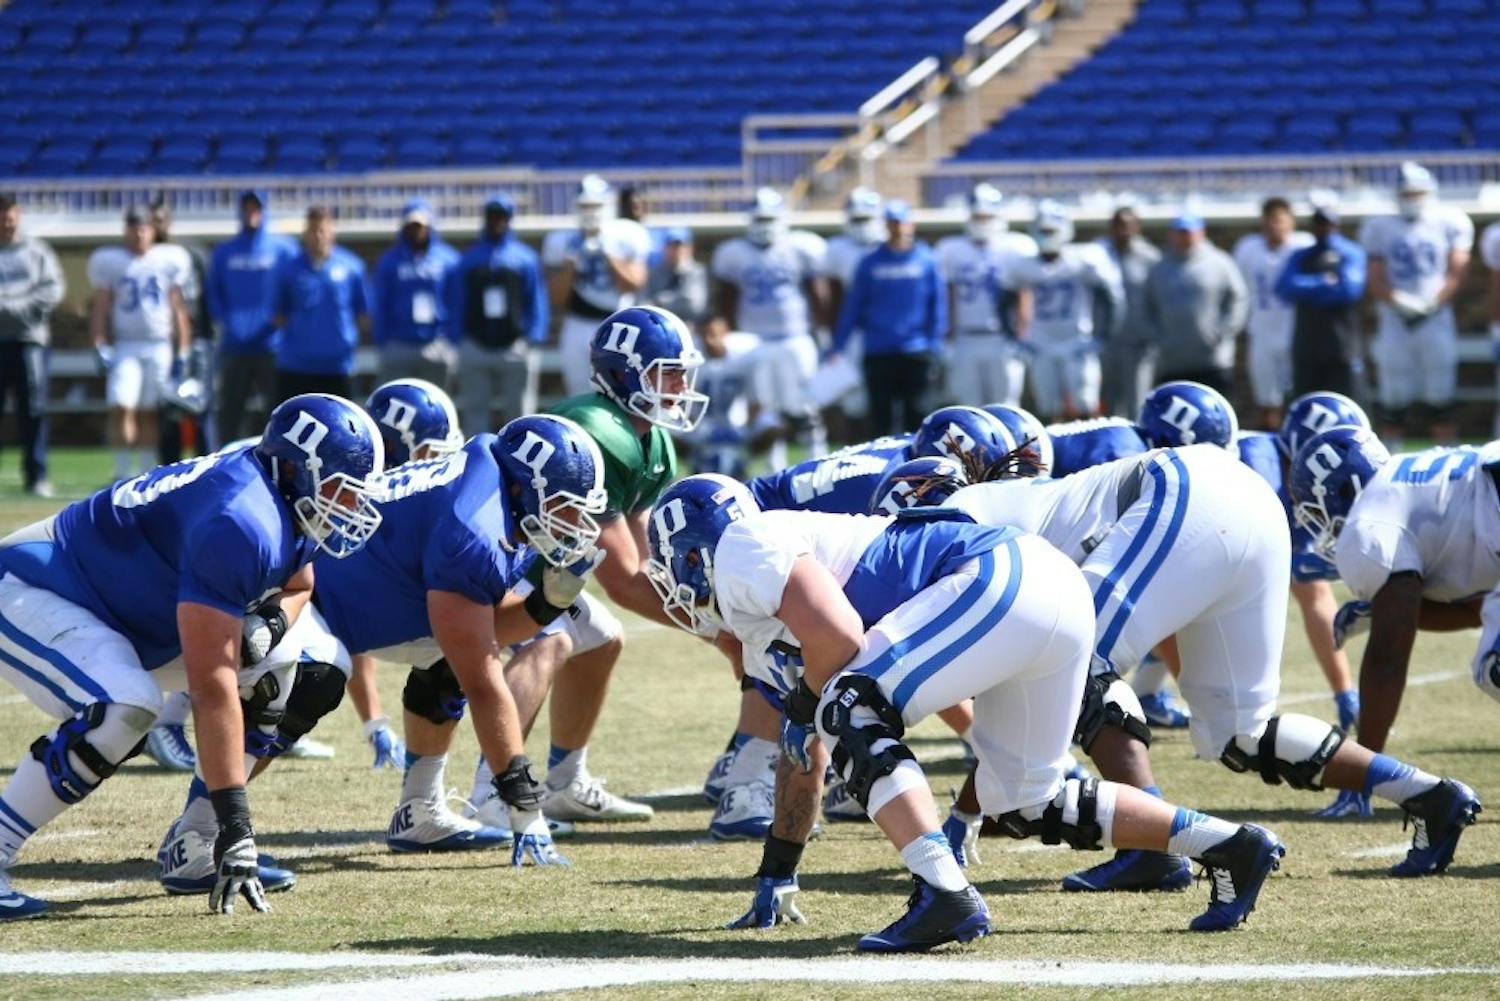 Head coach David Cutcliffe revealed Wednesday that starting guard Tanner Stone underwent back surgery, testing the depth of a Blue Devil offensive line that is already losing two starters from last season.